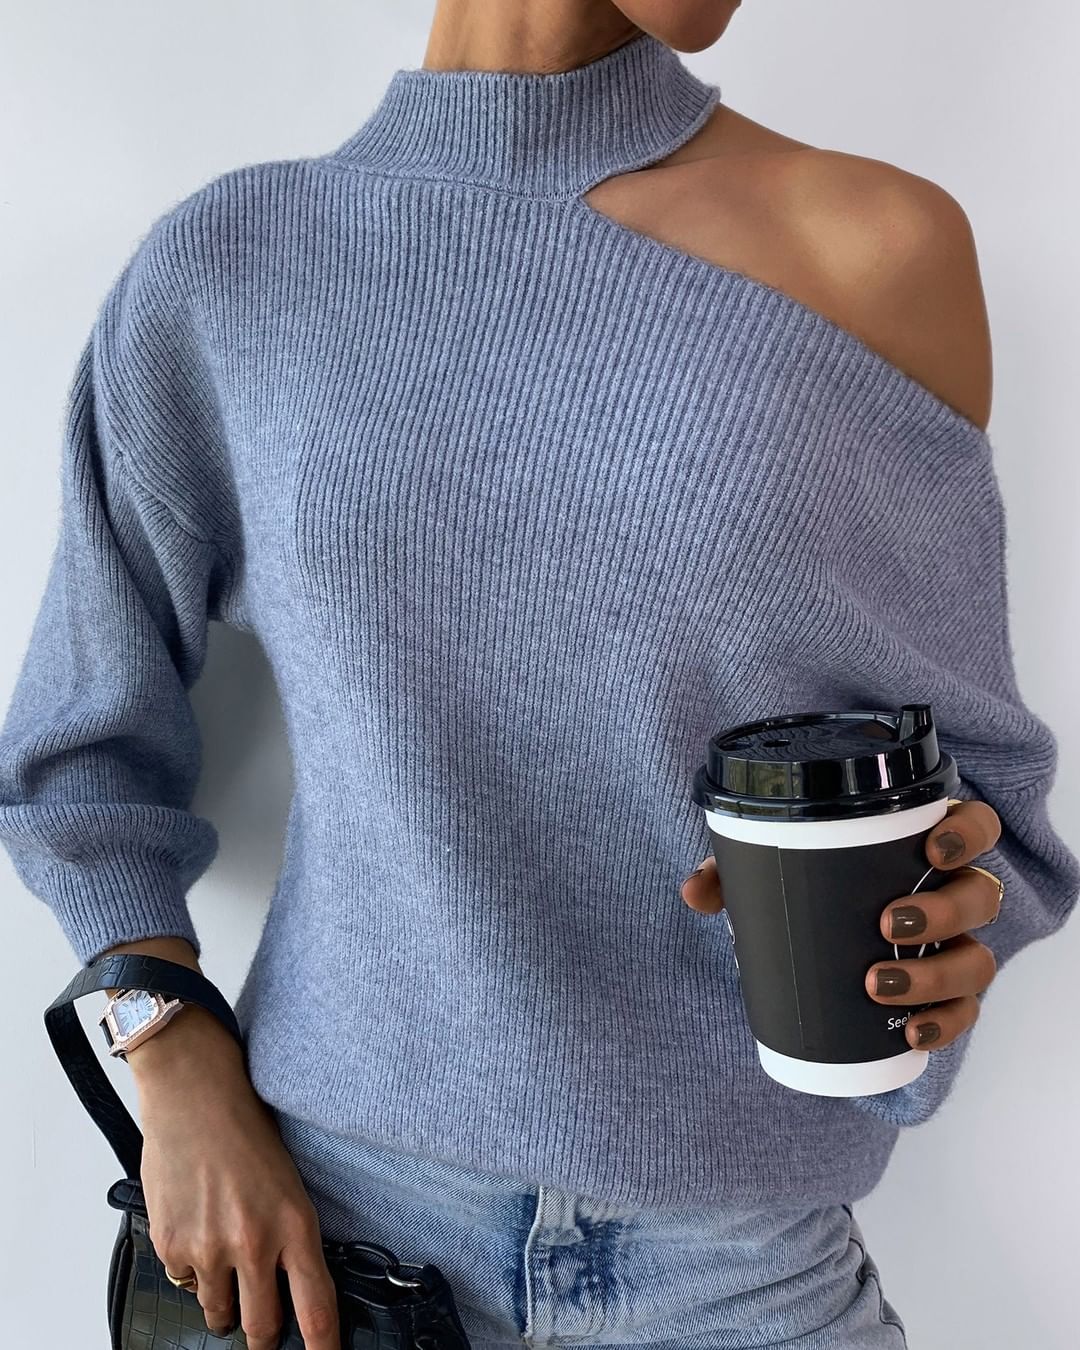 boutiquefeel_official - So...chic and cozy.⁠
🔍SKU：LZQ2217⁠
Shop:boutiquefeel.com⁠
 #fashion #style #sweaterweather